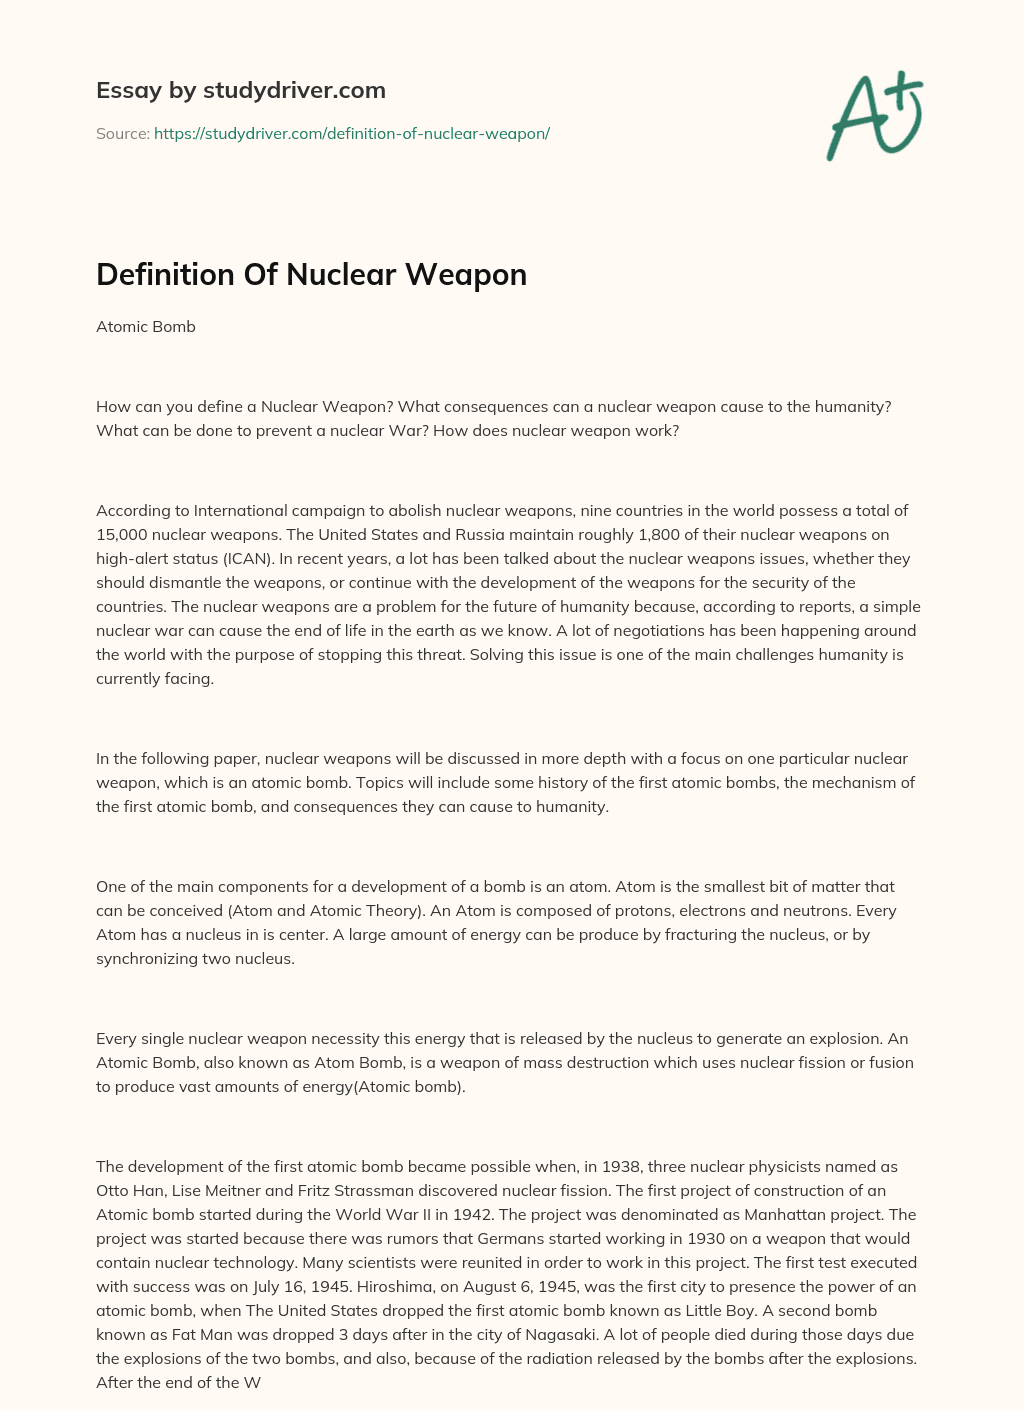 Definition of Nuclear Weapon essay